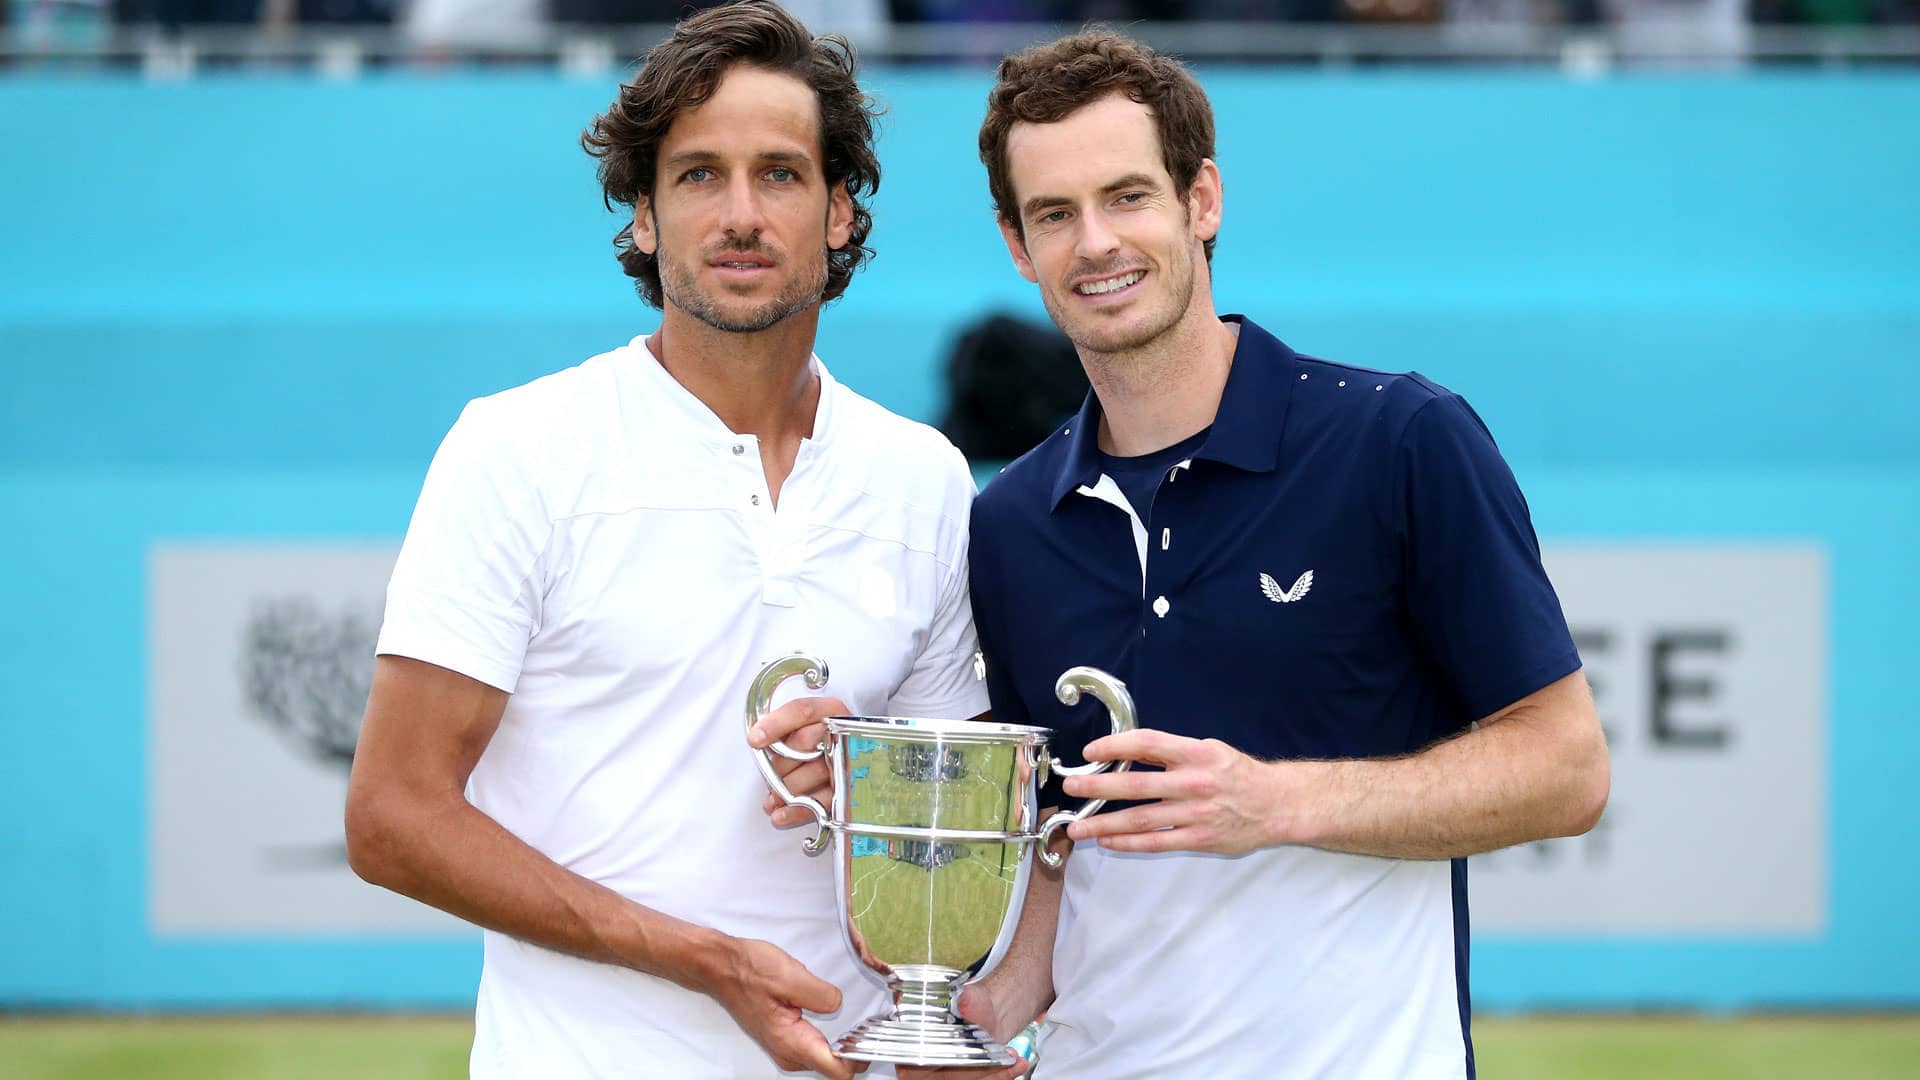 <a href='https://www.atptour.com/en/players/feliciano-lopez/l397/overview'>Feliciano Lopez</a> and <a href='https://www.atptour.com/en/players/andy-murray/mc10/overview'>Andy Murray</a> hold the Queen's Club 2019 doubles trophy